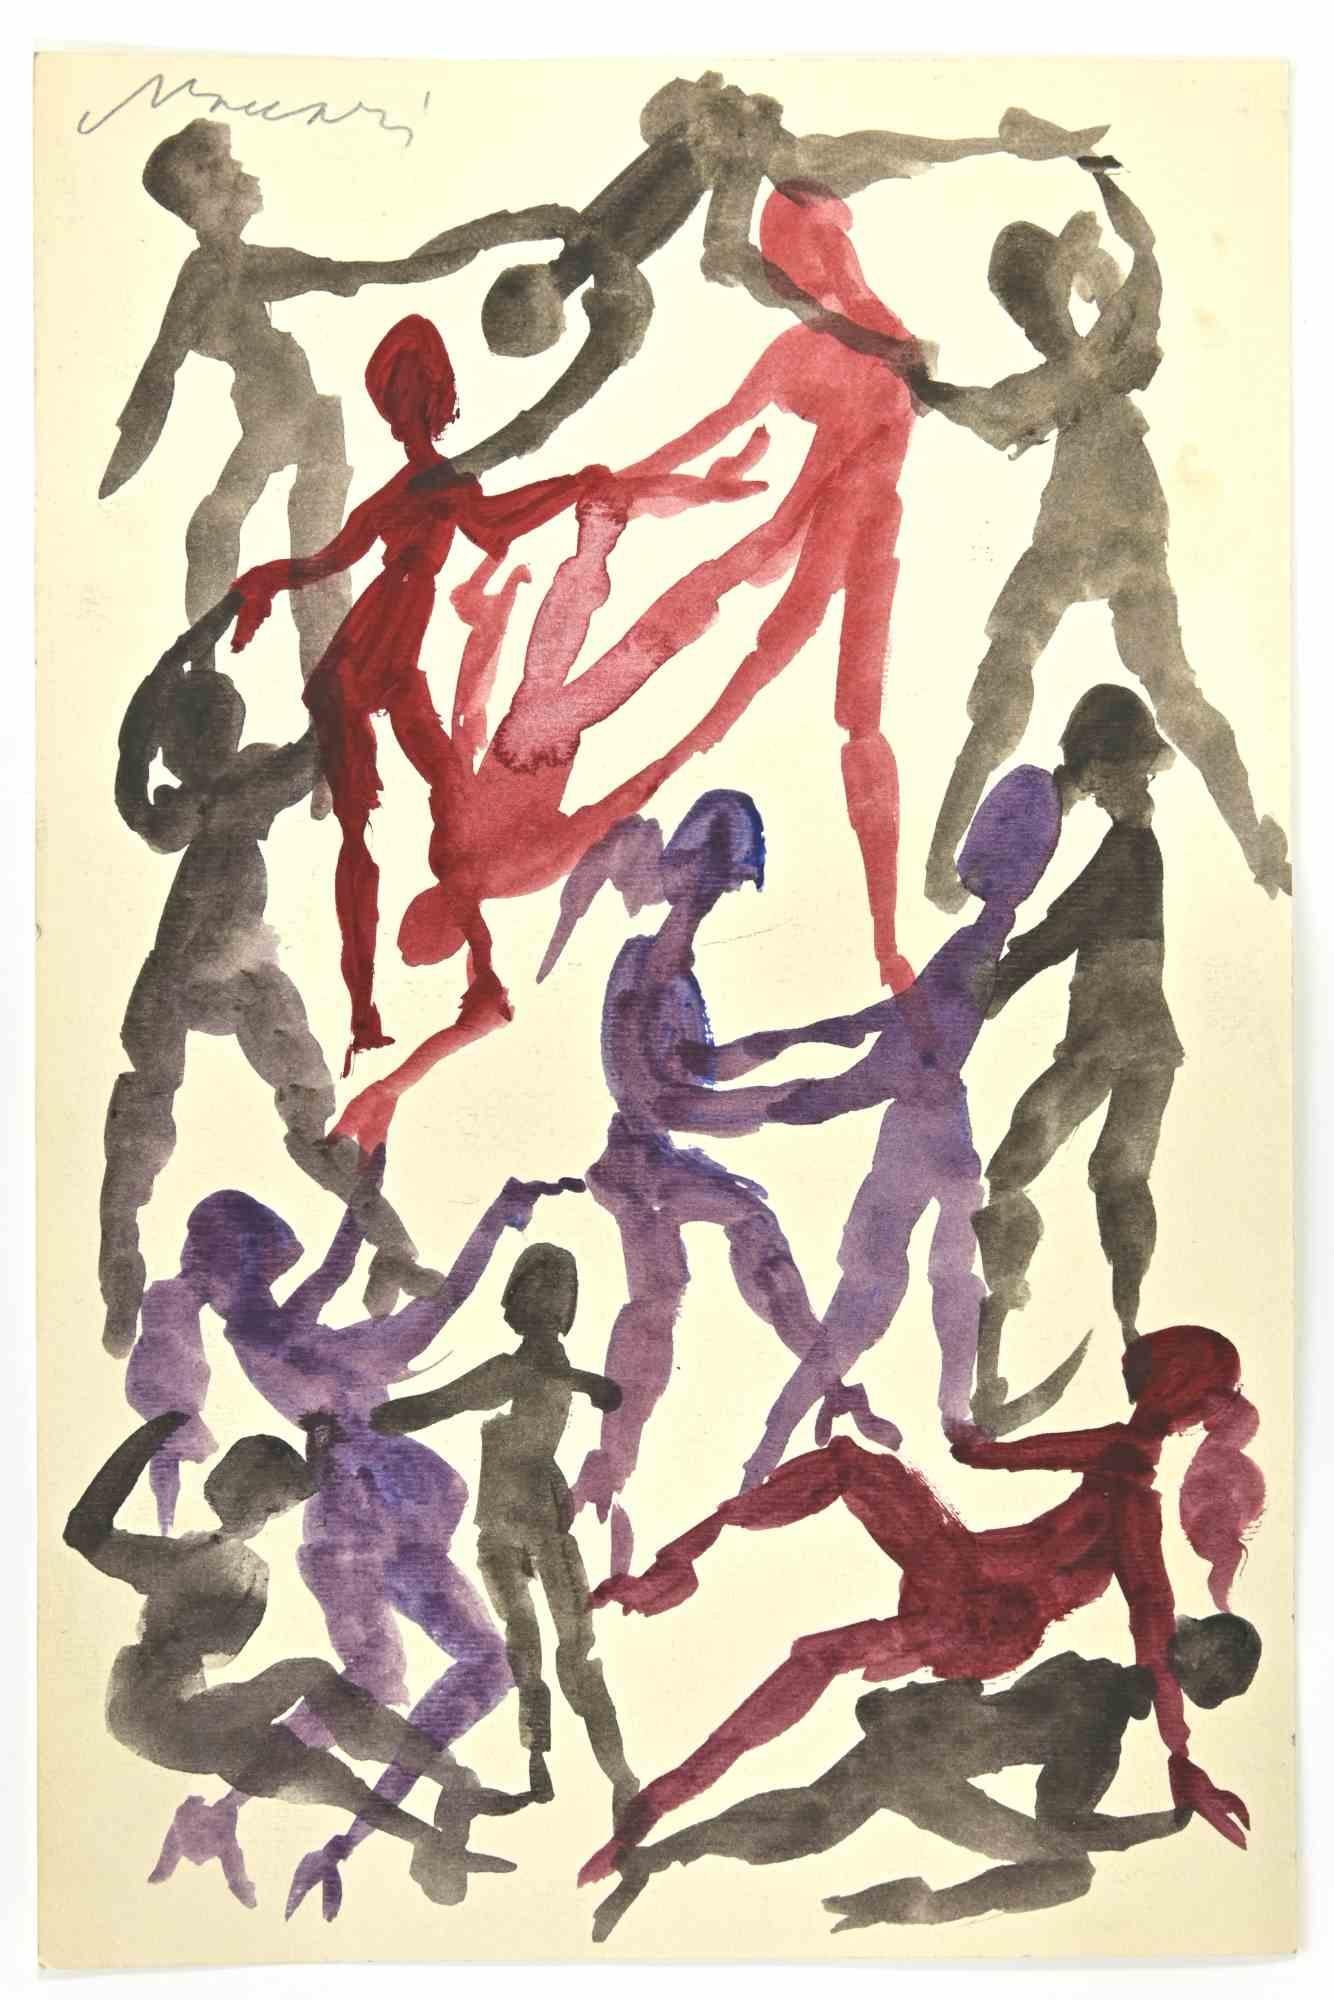 Dances is a watercolor Drawing realized by Mino Maccari  (1924-1989) in the 1960s.

Hand-signed on the lower.

Good condition.

Mino Maccari (Siena, 1924-Rome, June 16, 1989) was an Italian writer, painter, engraver and journalist, winner of the